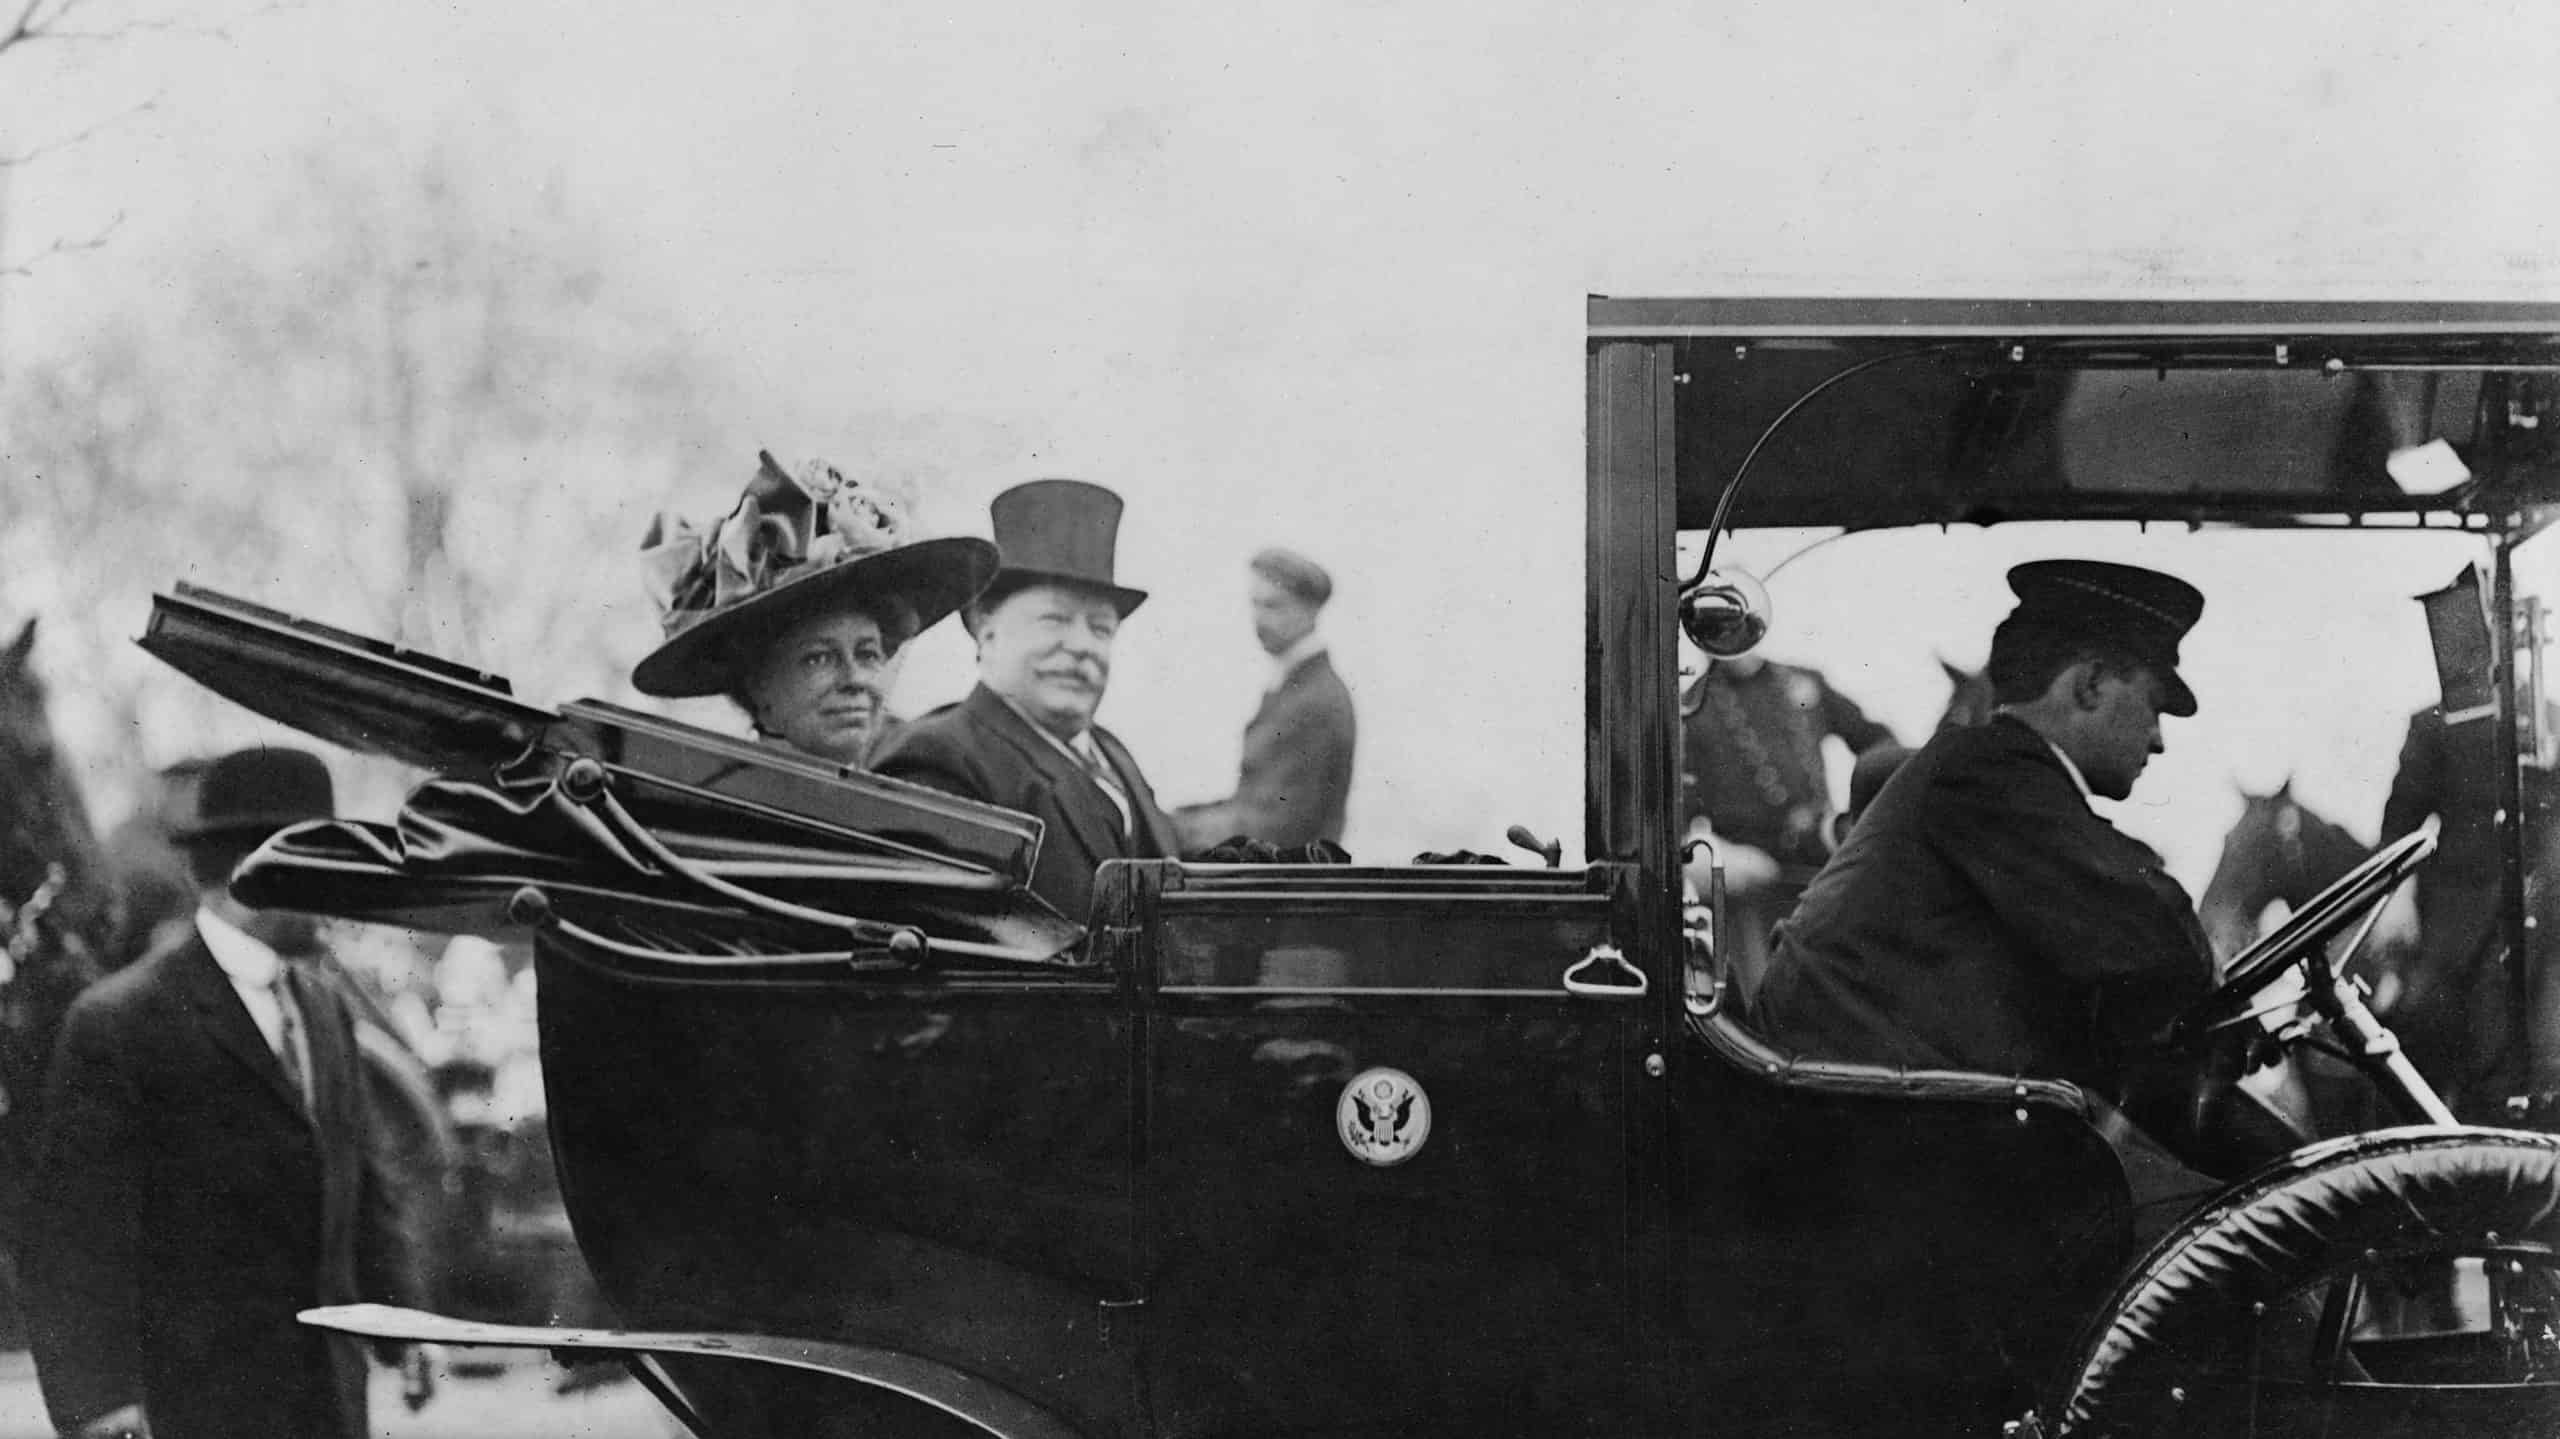 First Lady Helen Taft, pictured here in a convertible with her husband, President William Howard Taft, was the original visionary for what would become Washington, DC's iconic cherry trees.